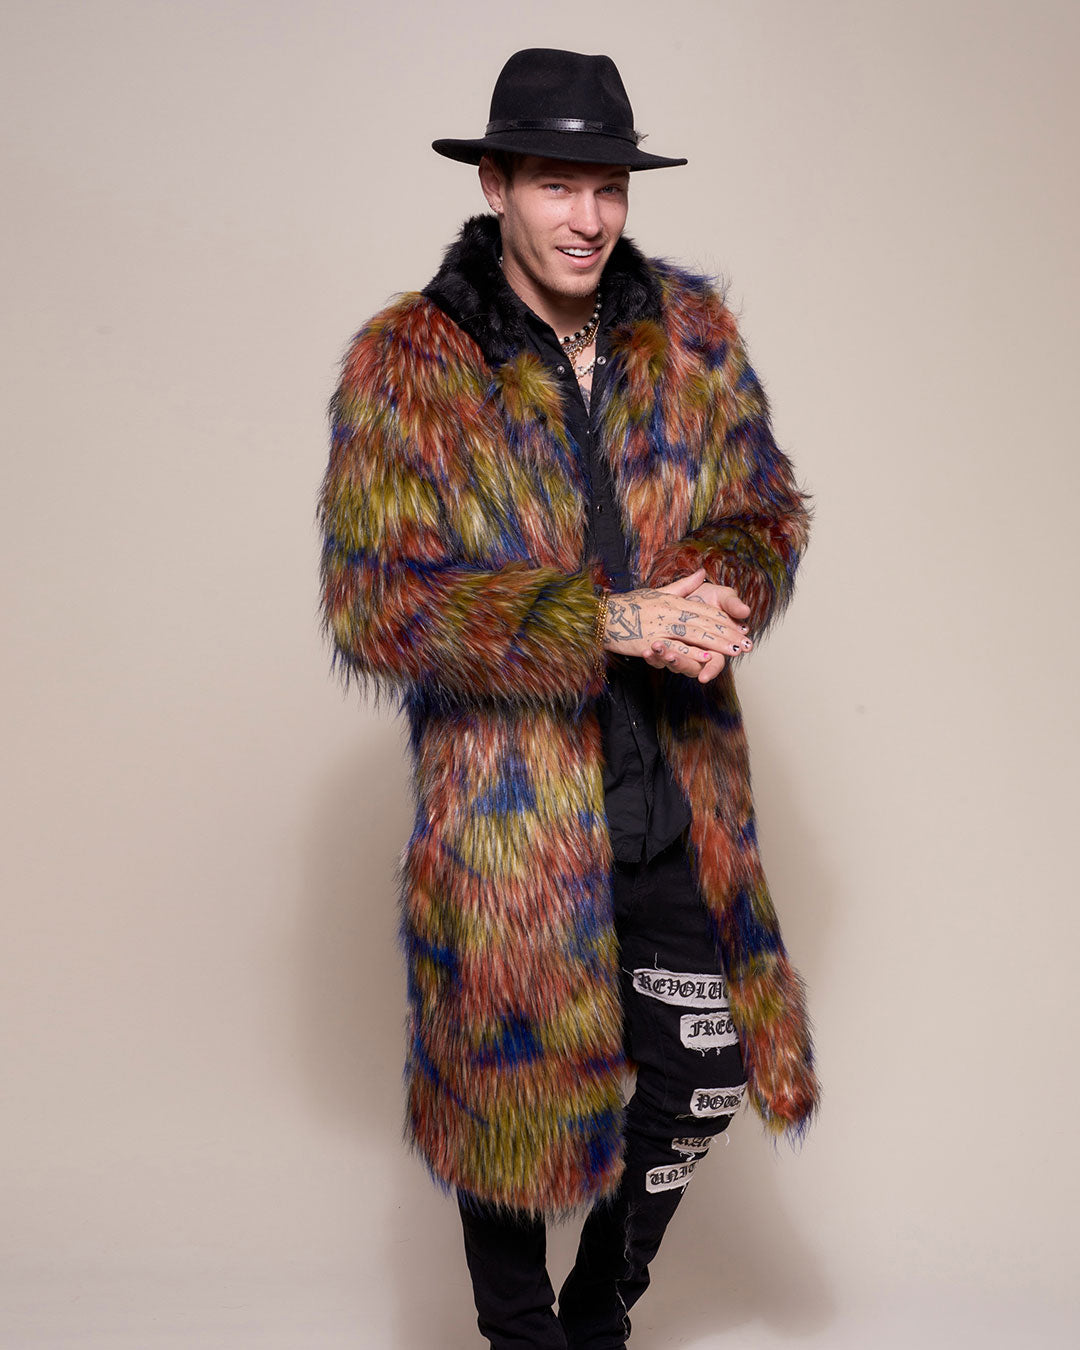 Parrot Faux Fur Coat with Collar on Male